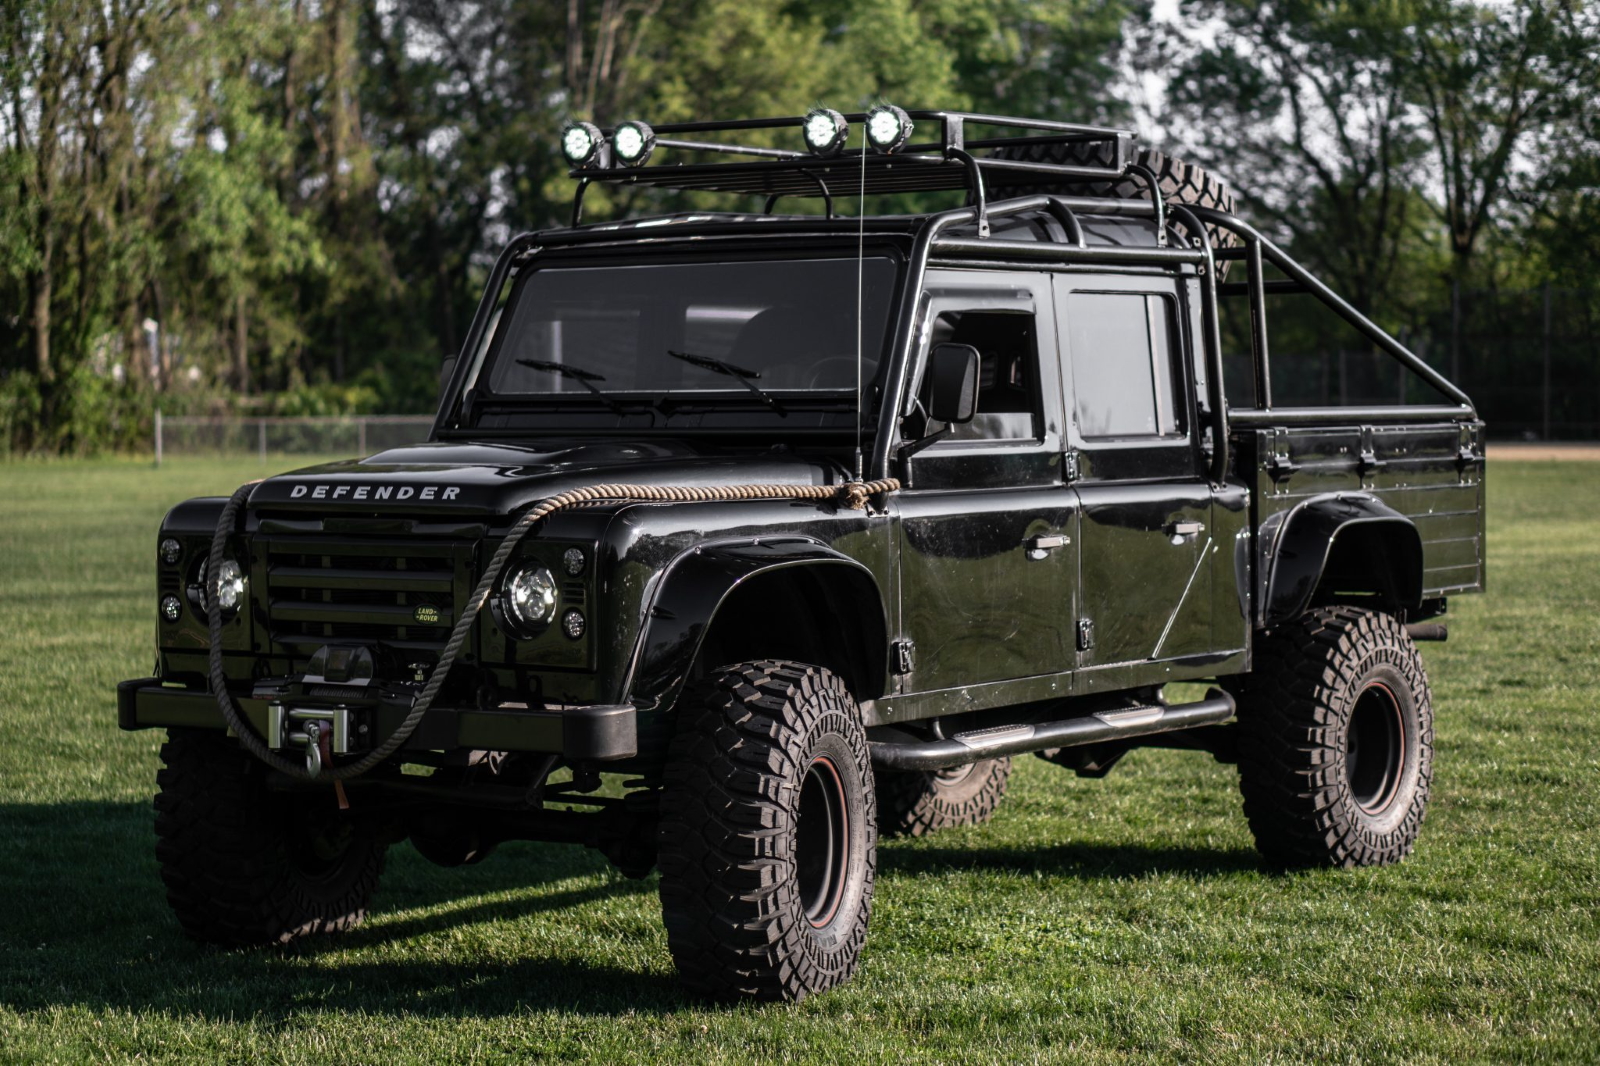 1993 Land Rover Defender 130 Customized SpectreStyle Is